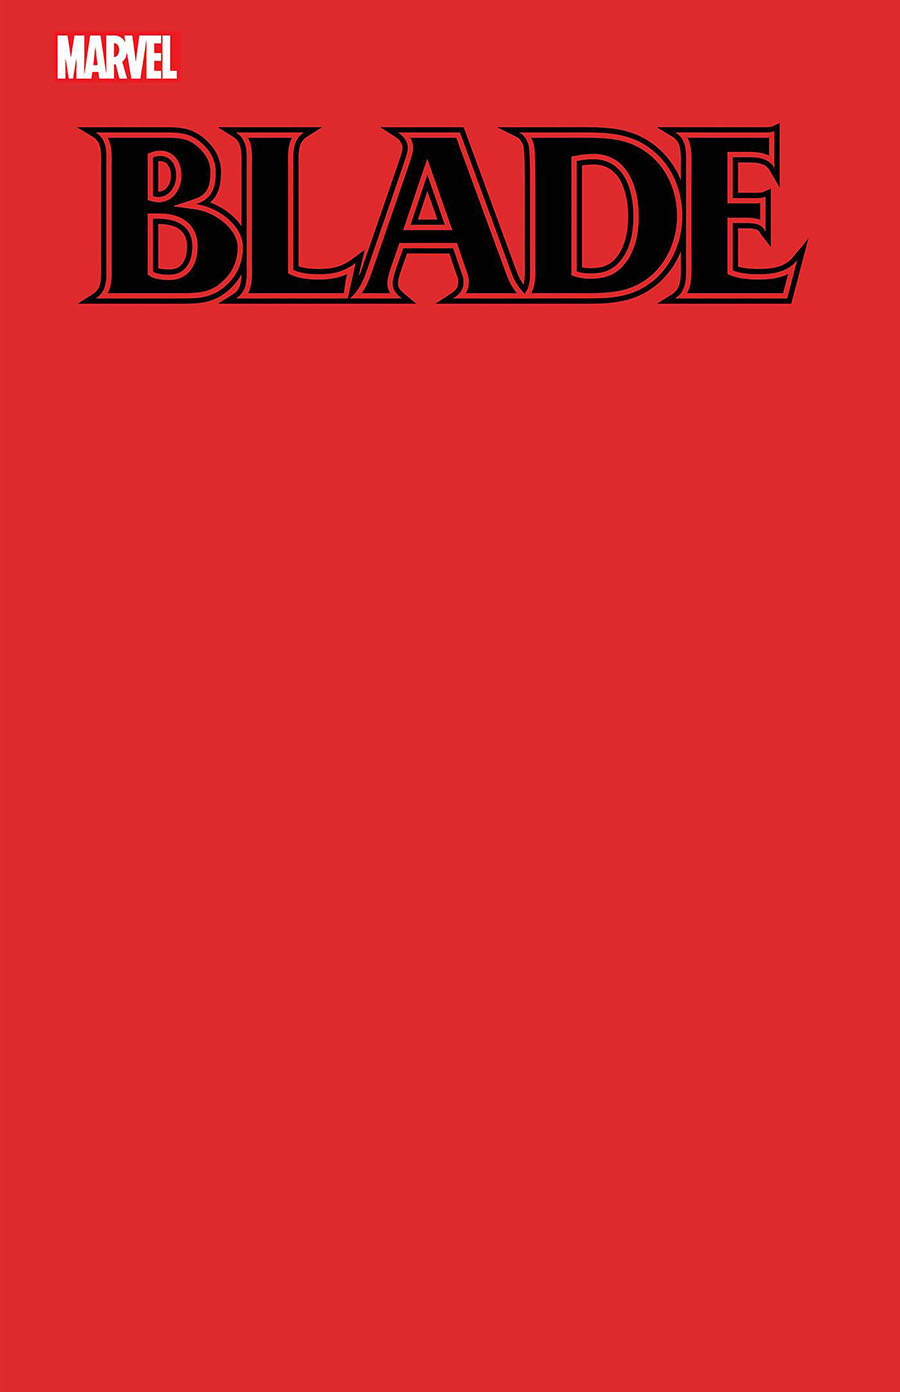 Blade Vol 4 #1 Cover H Variant Blood Red Blank Cover